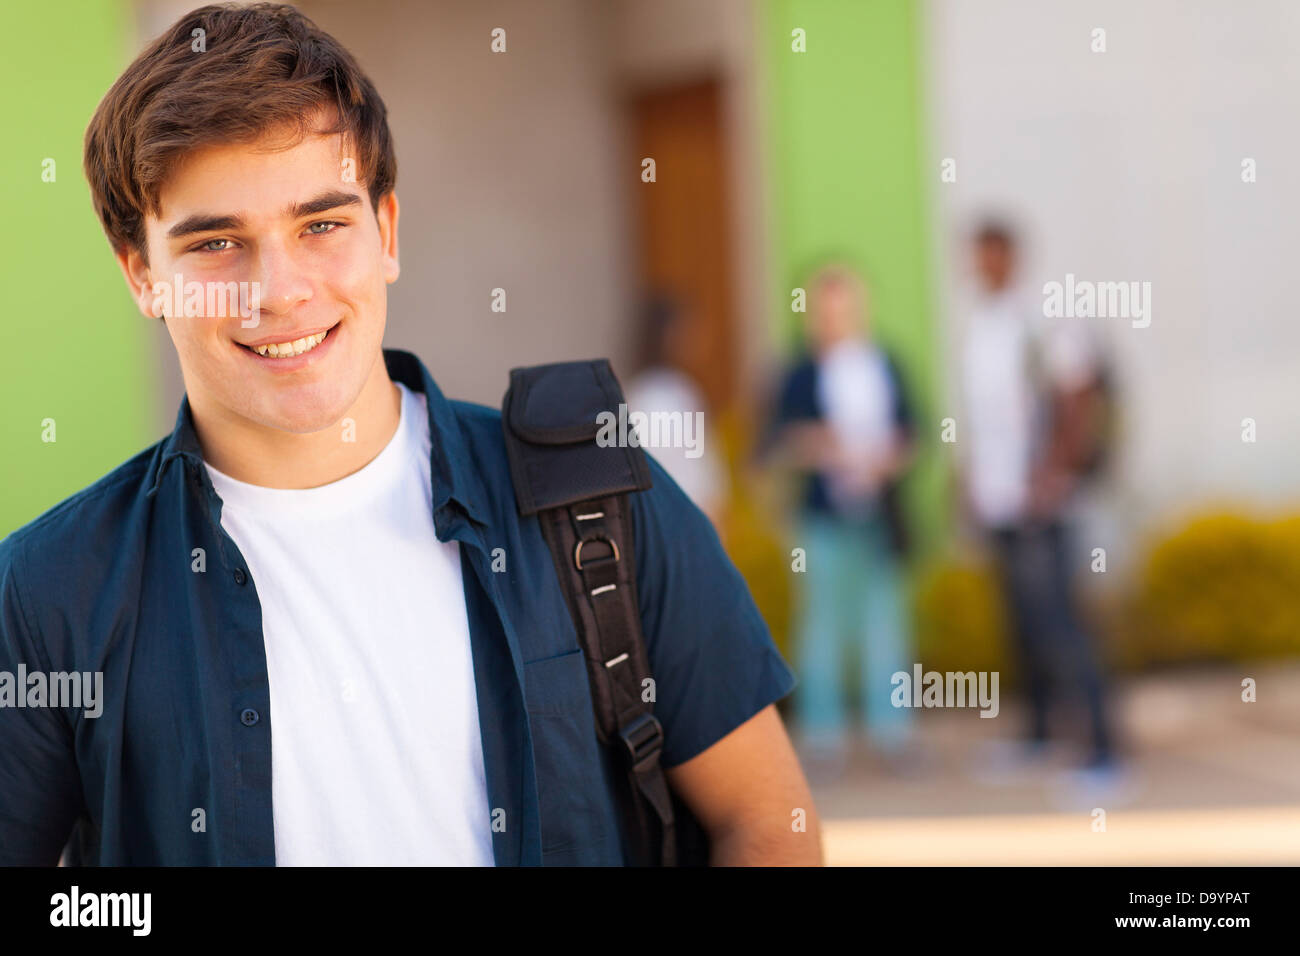 smiling teen boy carrying schoolbag Stock Photo